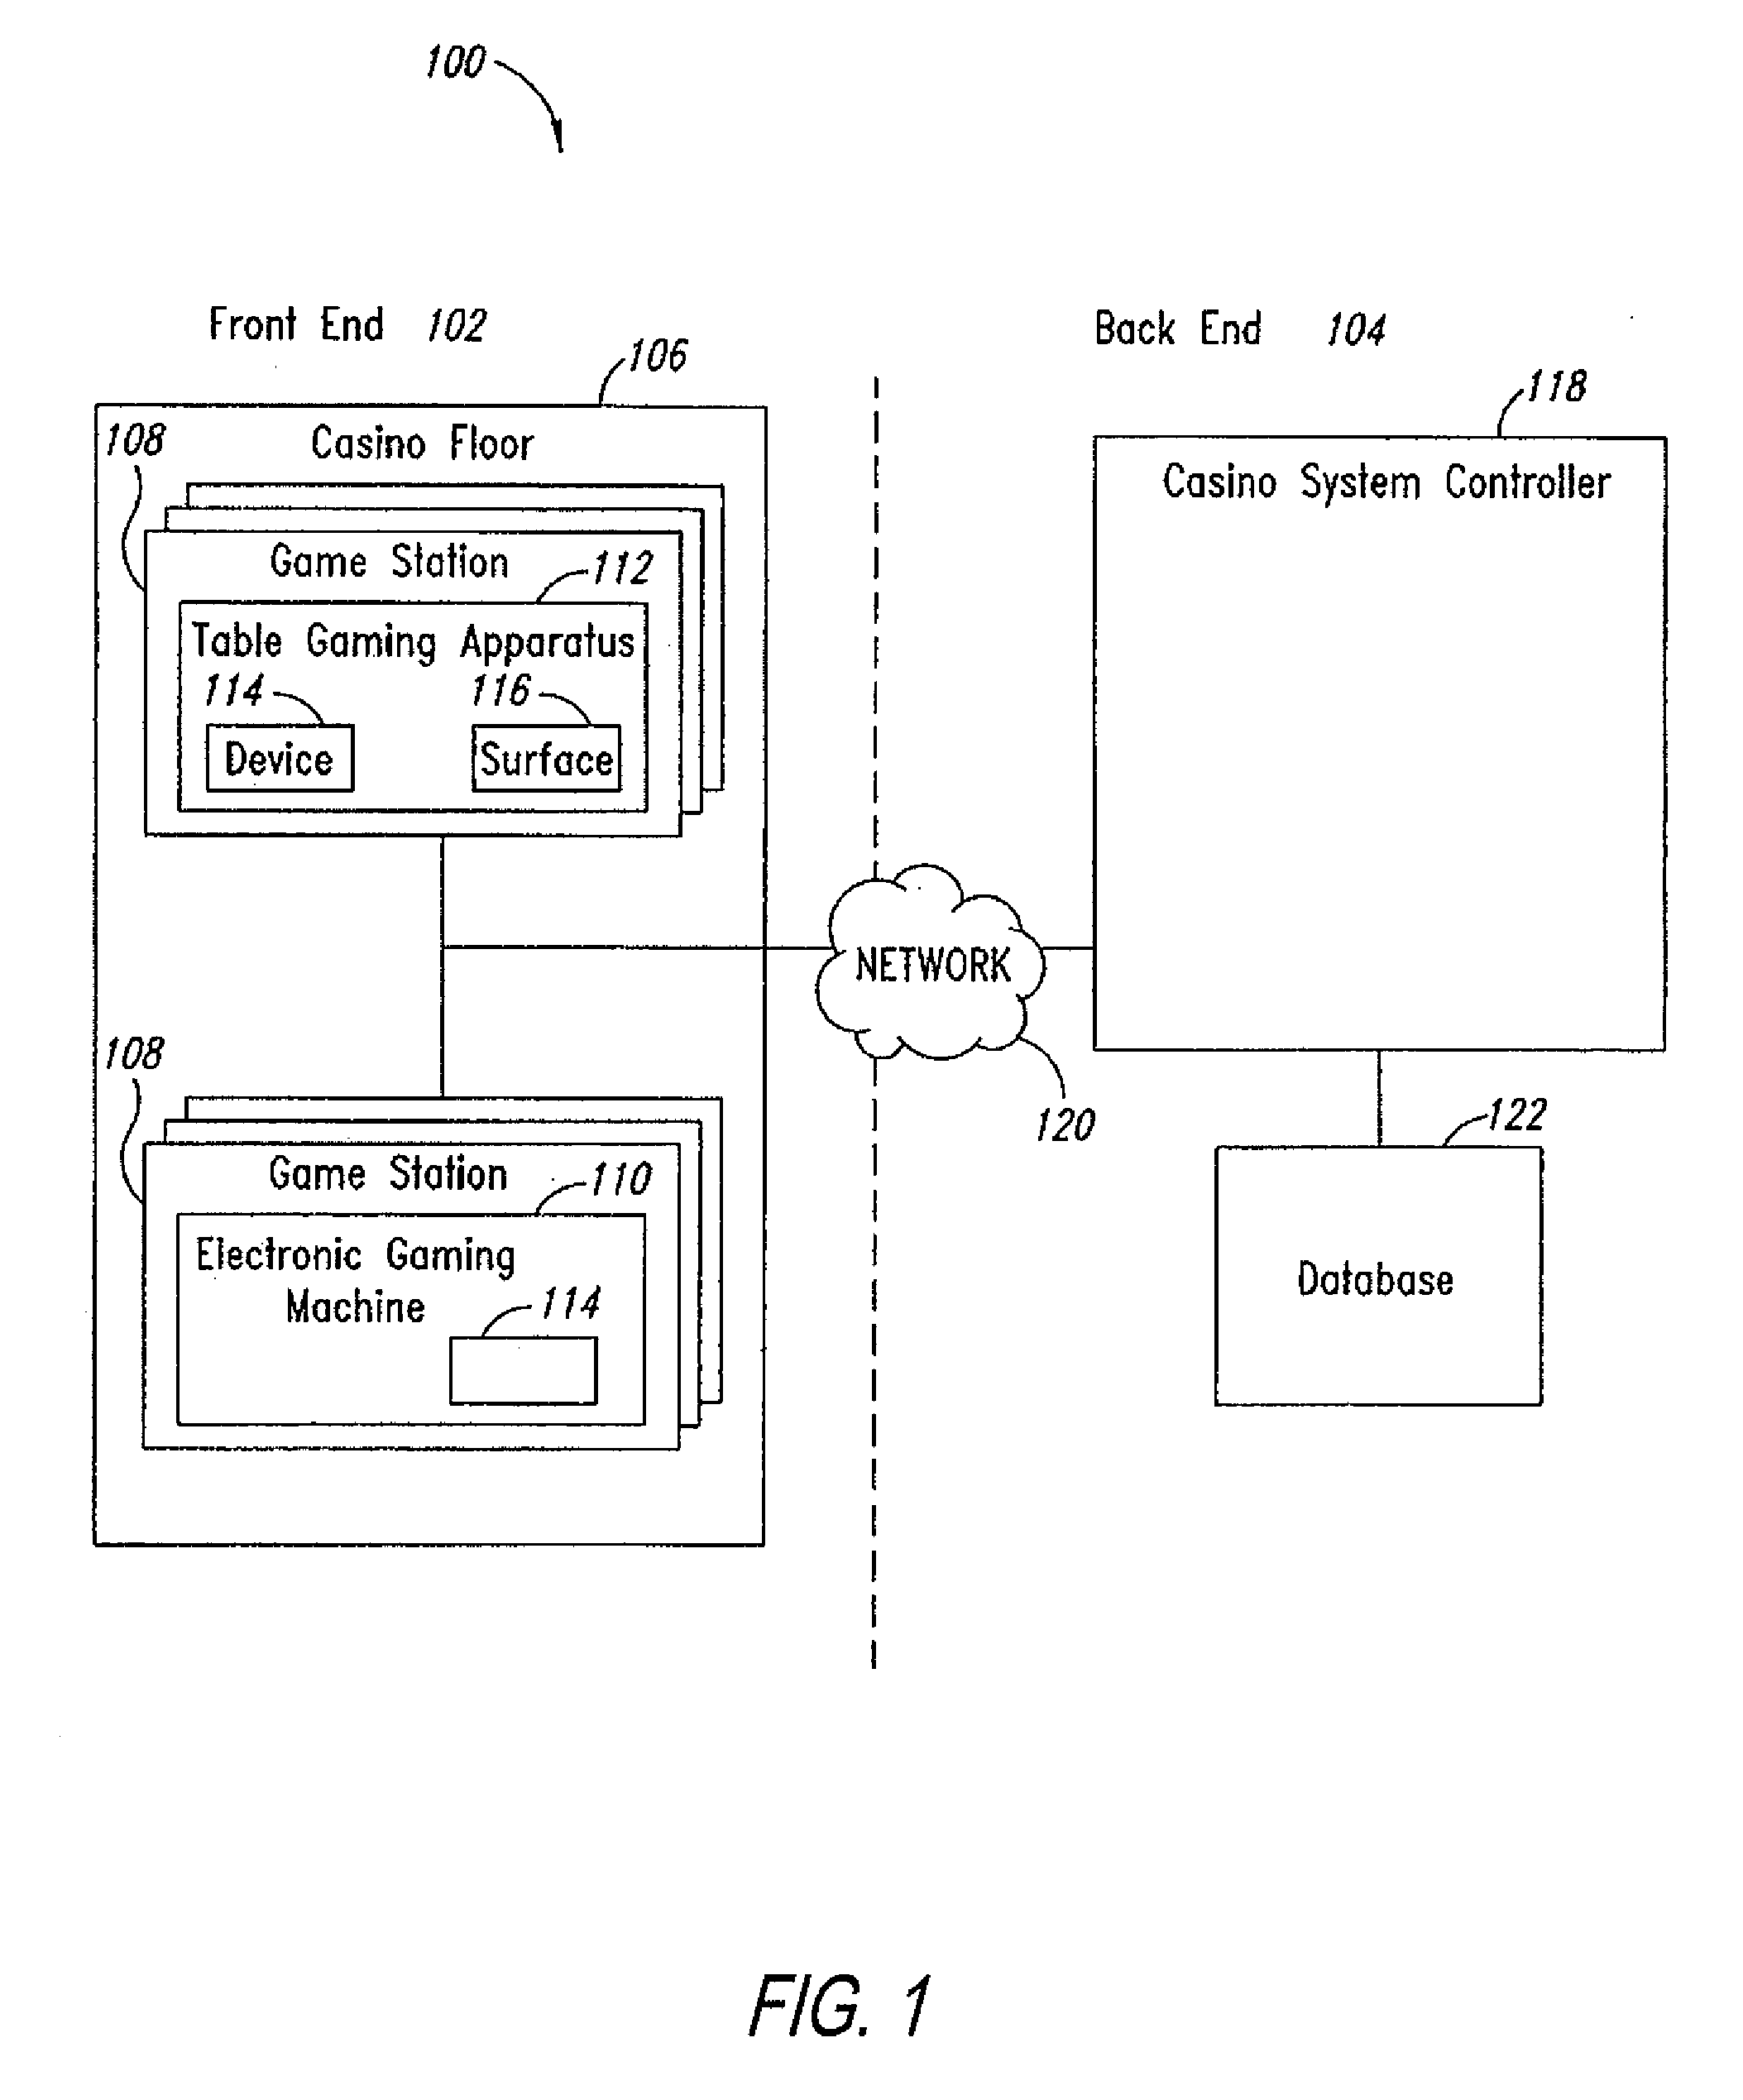 Method and system for providing download and configuration job progress tracking and display via host user interface